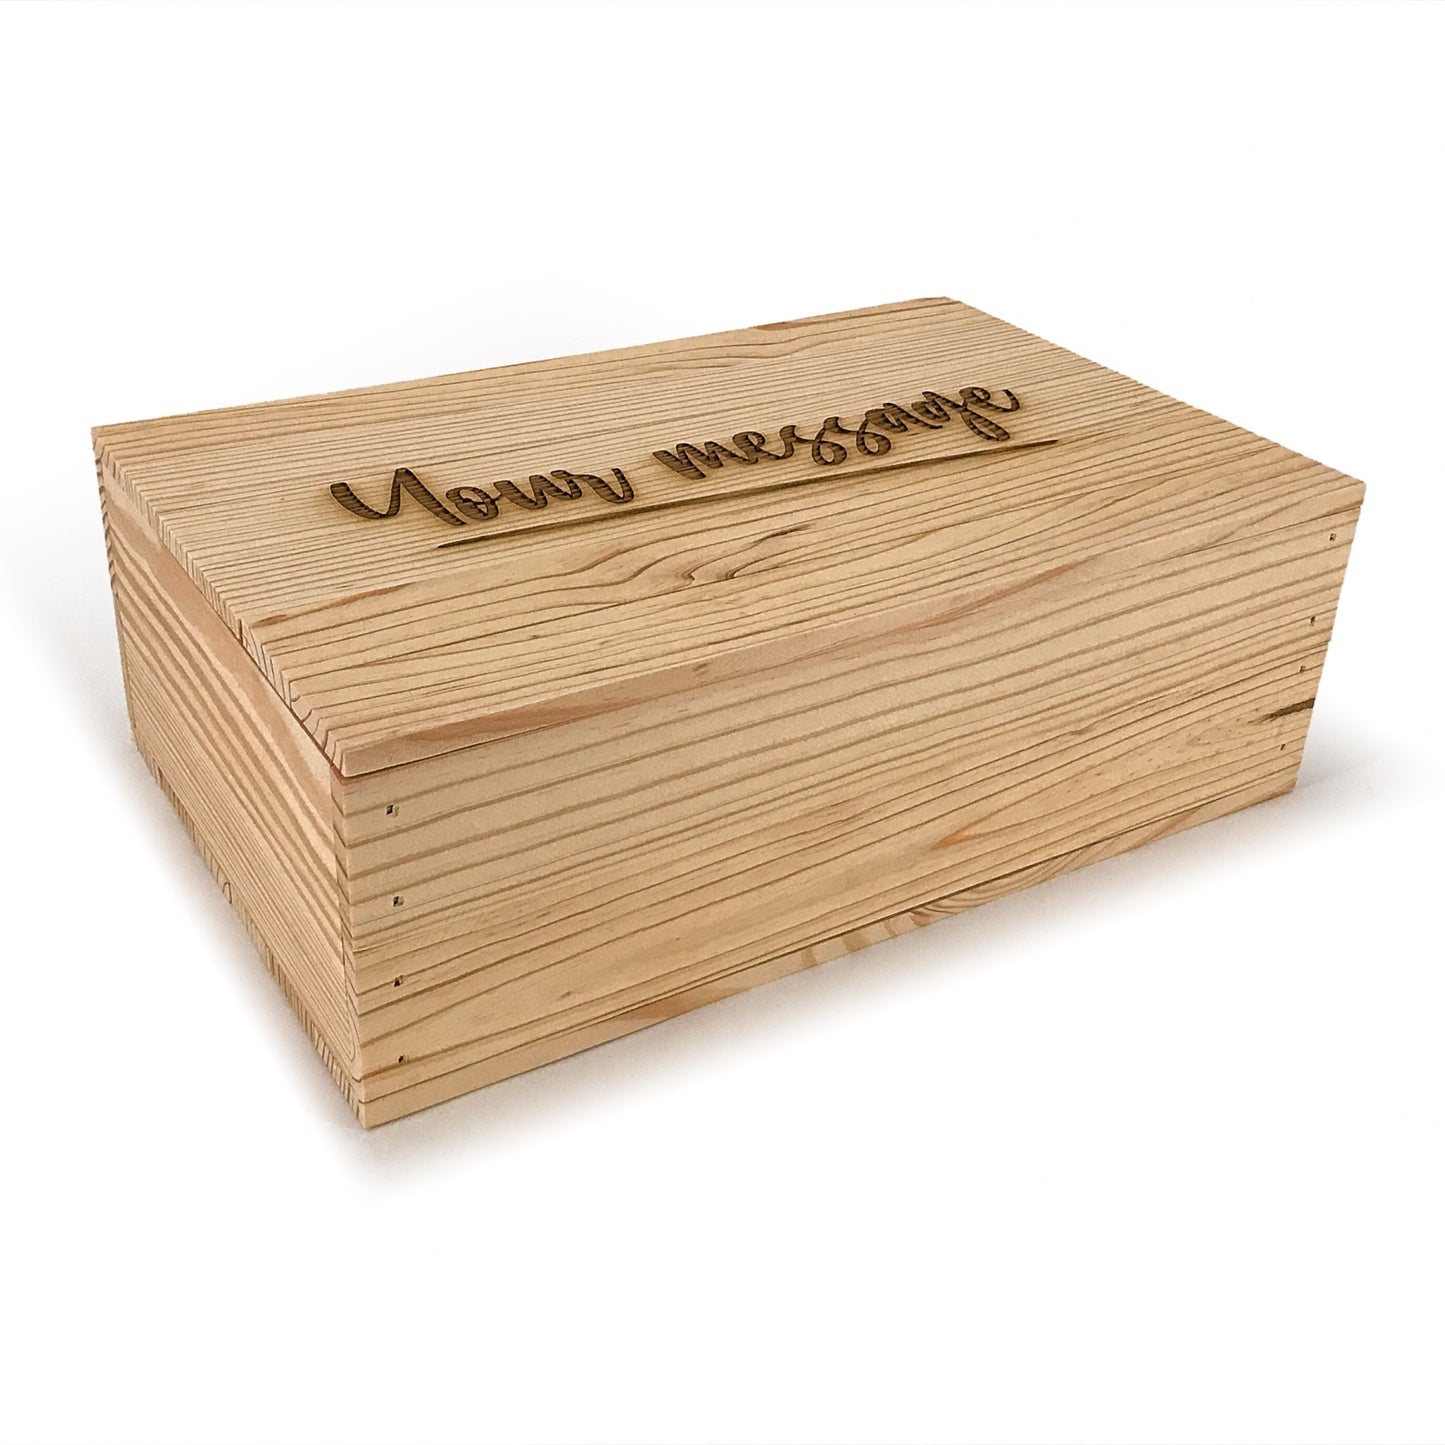 Two Bottle Wine Crate Boxes with Custom Message on Lid 14x9x4.5, 6-WB-14-9-4.5-ST-NW-LL,  12-WB-14-9-4.5-ST-NW-LL,  24-WB-14-9-4.5-ST-NW-LL,  48-WB-14-9-4.5-ST-NW-LL,  96-WB-14-9-4.5-ST-NW-LL